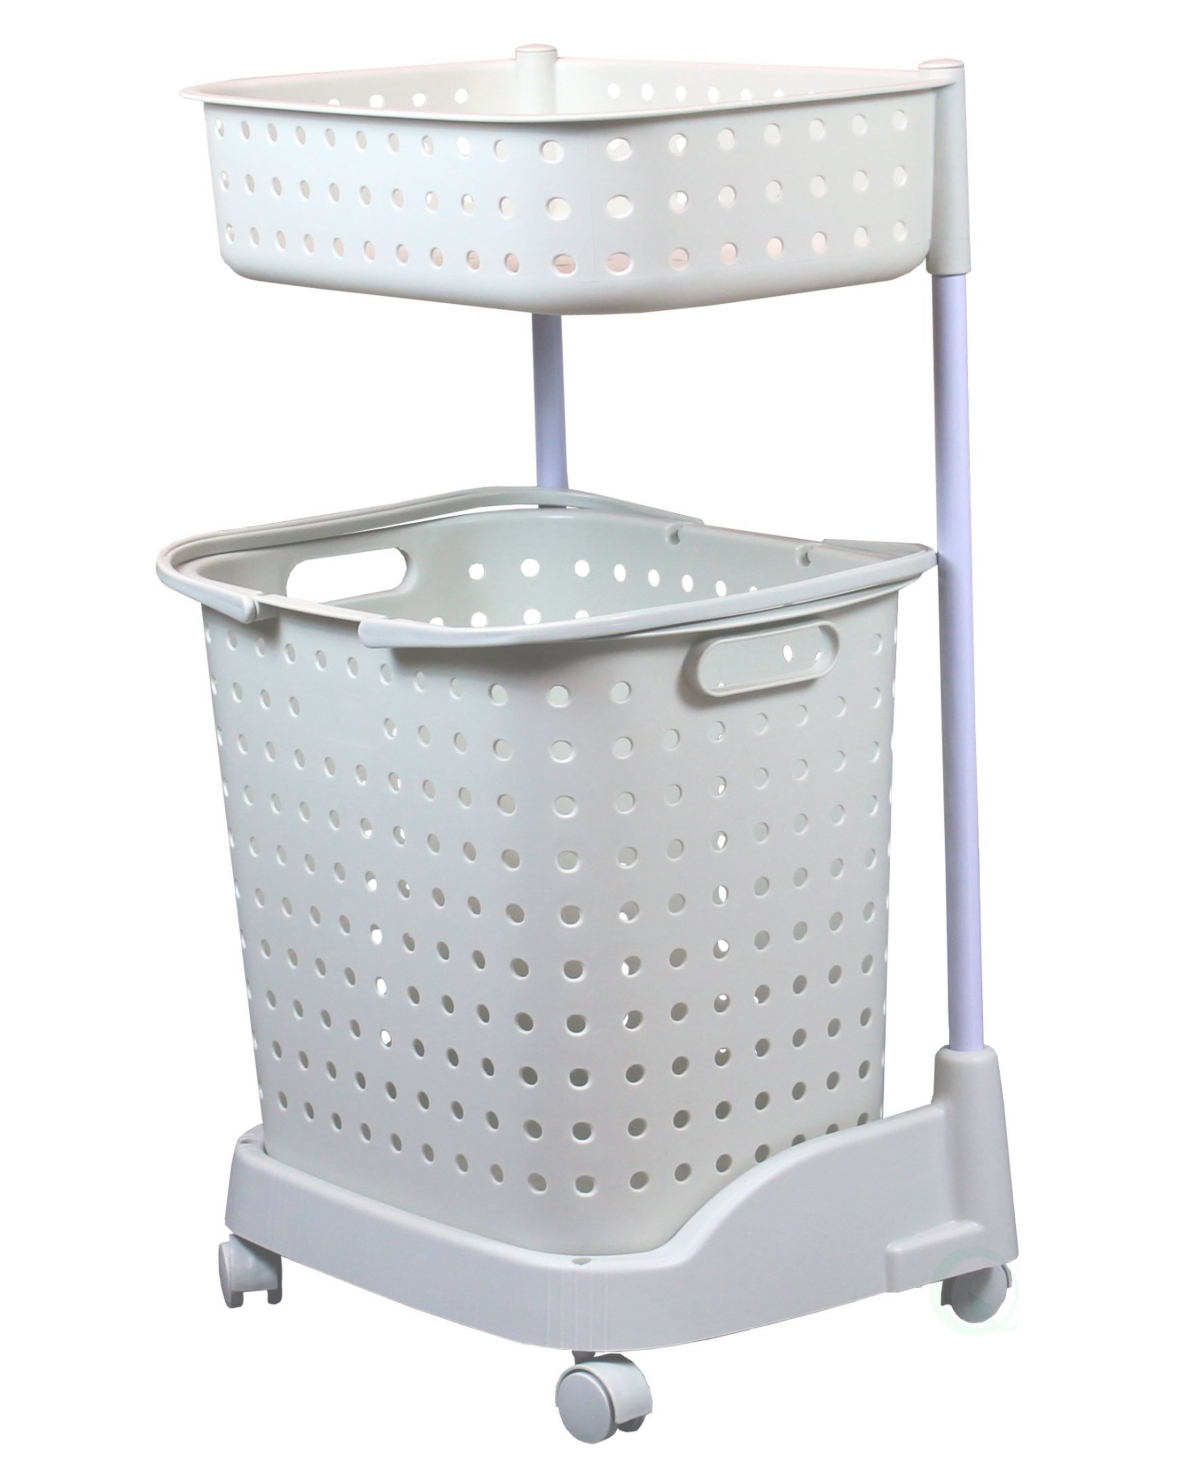 Vintiquewise 2 Tier Plastic Laundry Basket with Wheels - White